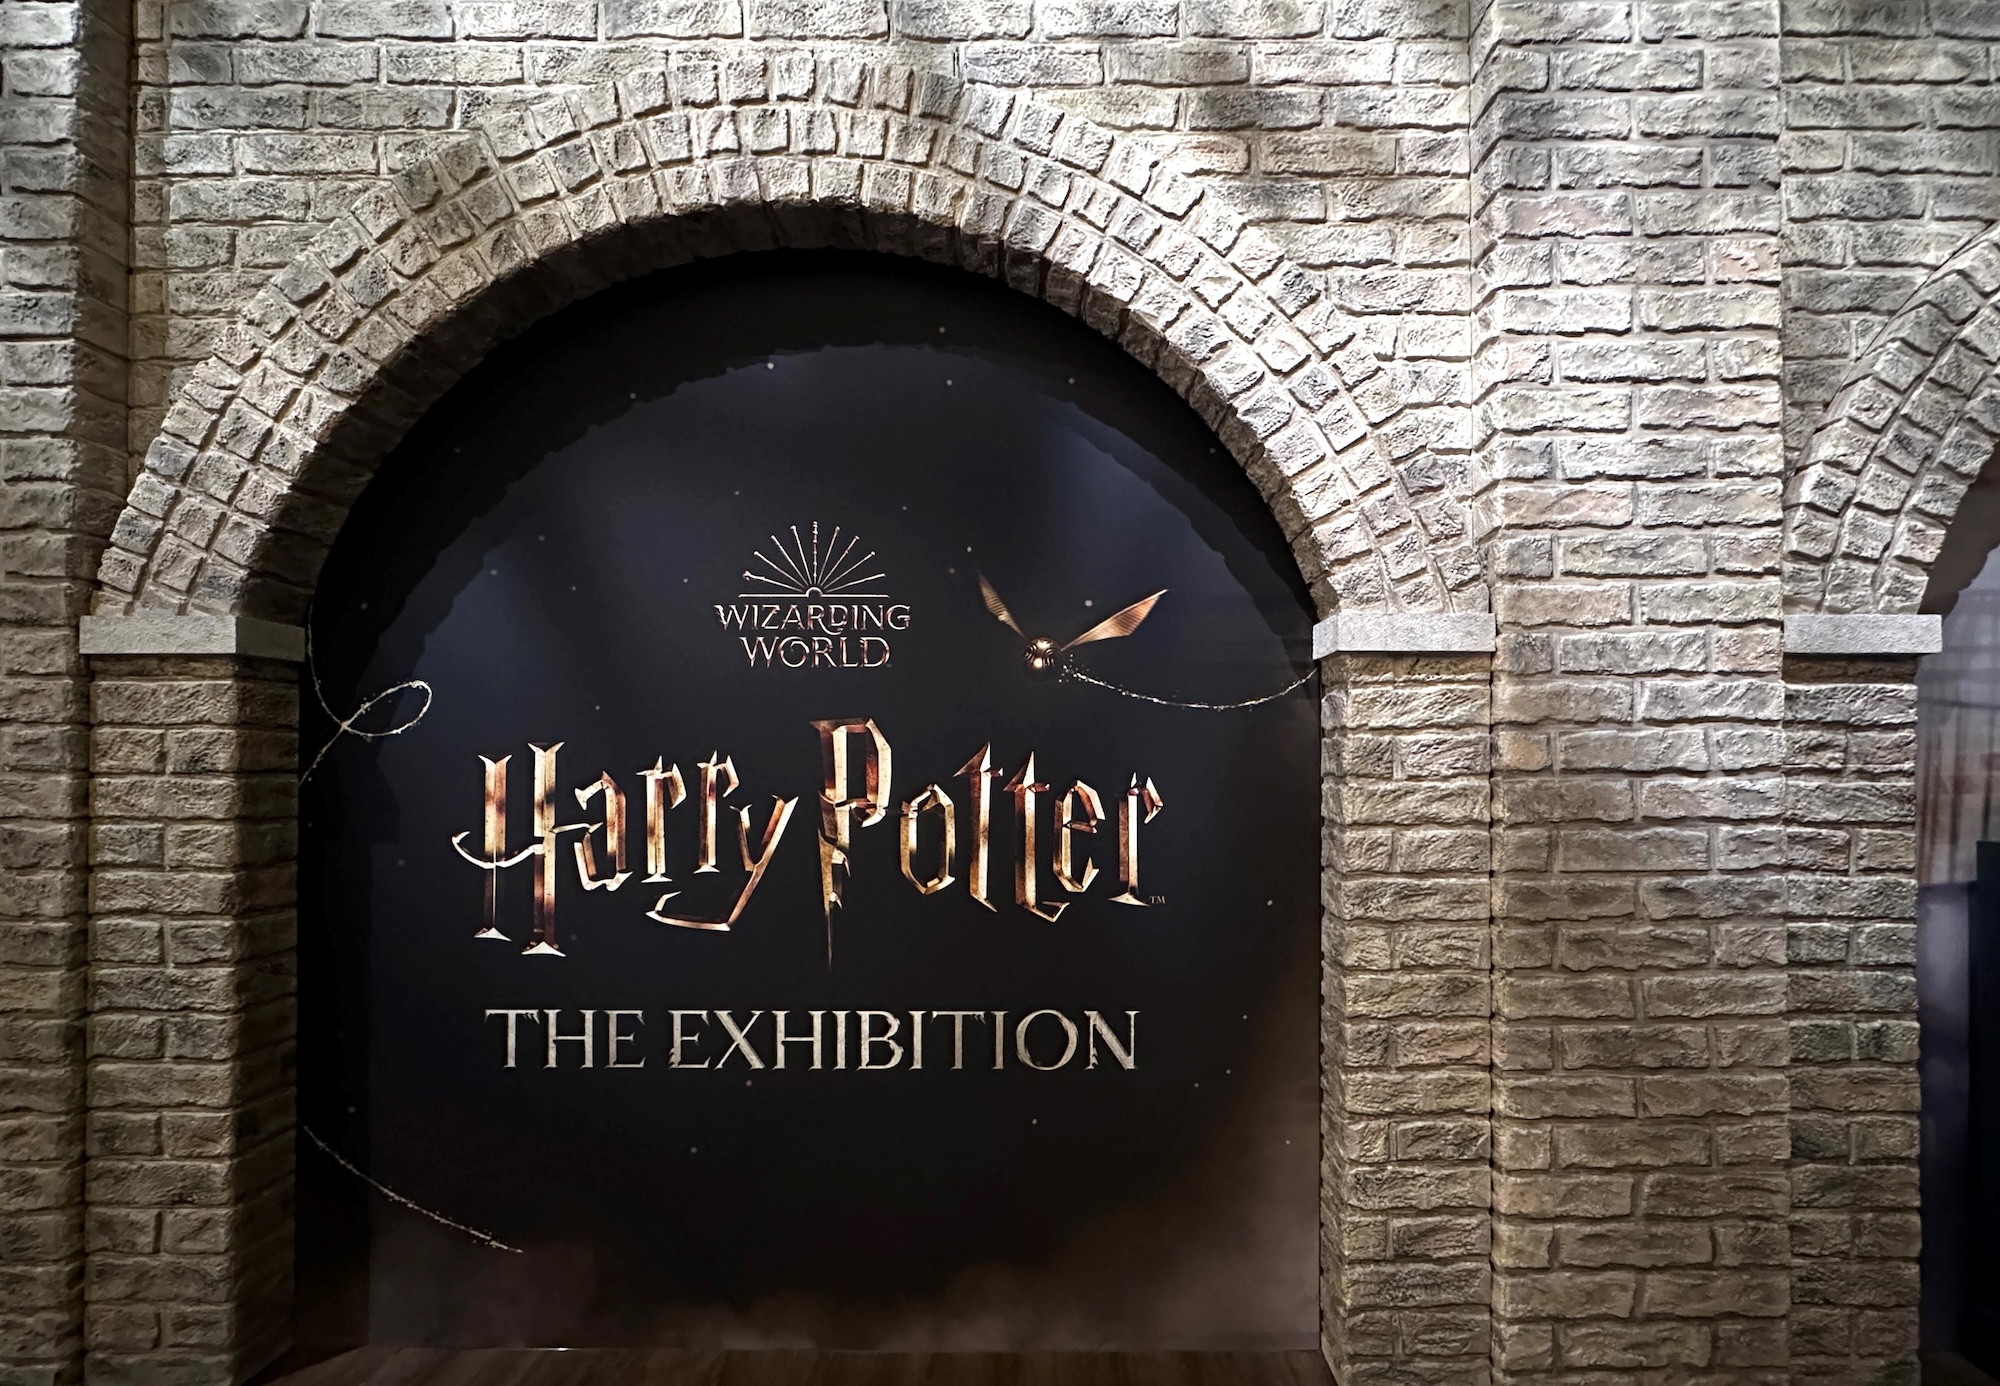 Behind the magic: The making of the Harry Potter exhibition in Macao